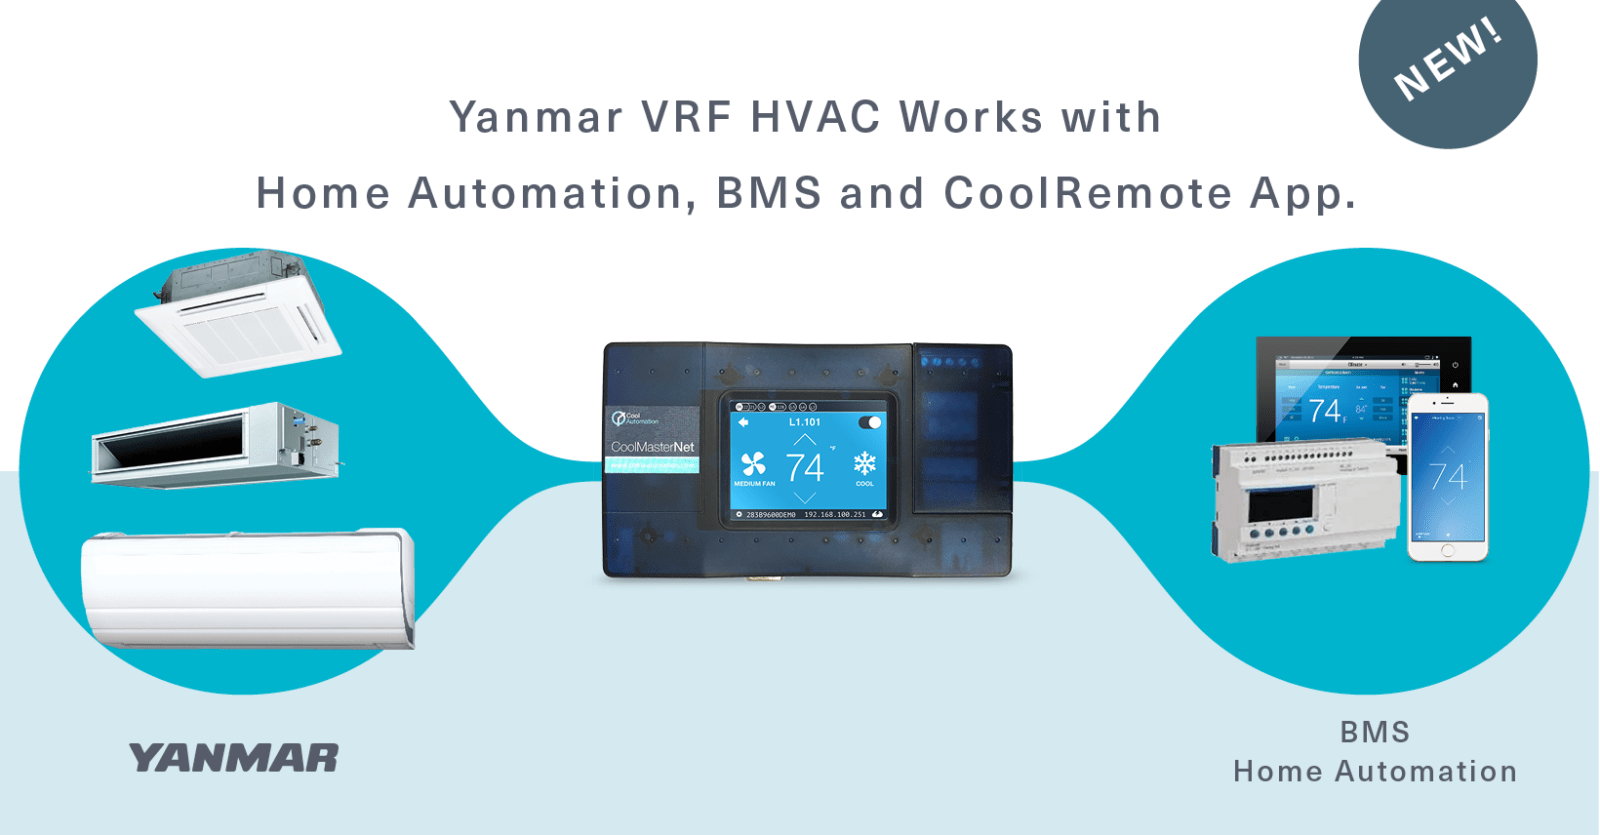 Yanmar VRF HVAC Works with Home Automation, BMS and CoolRemote App